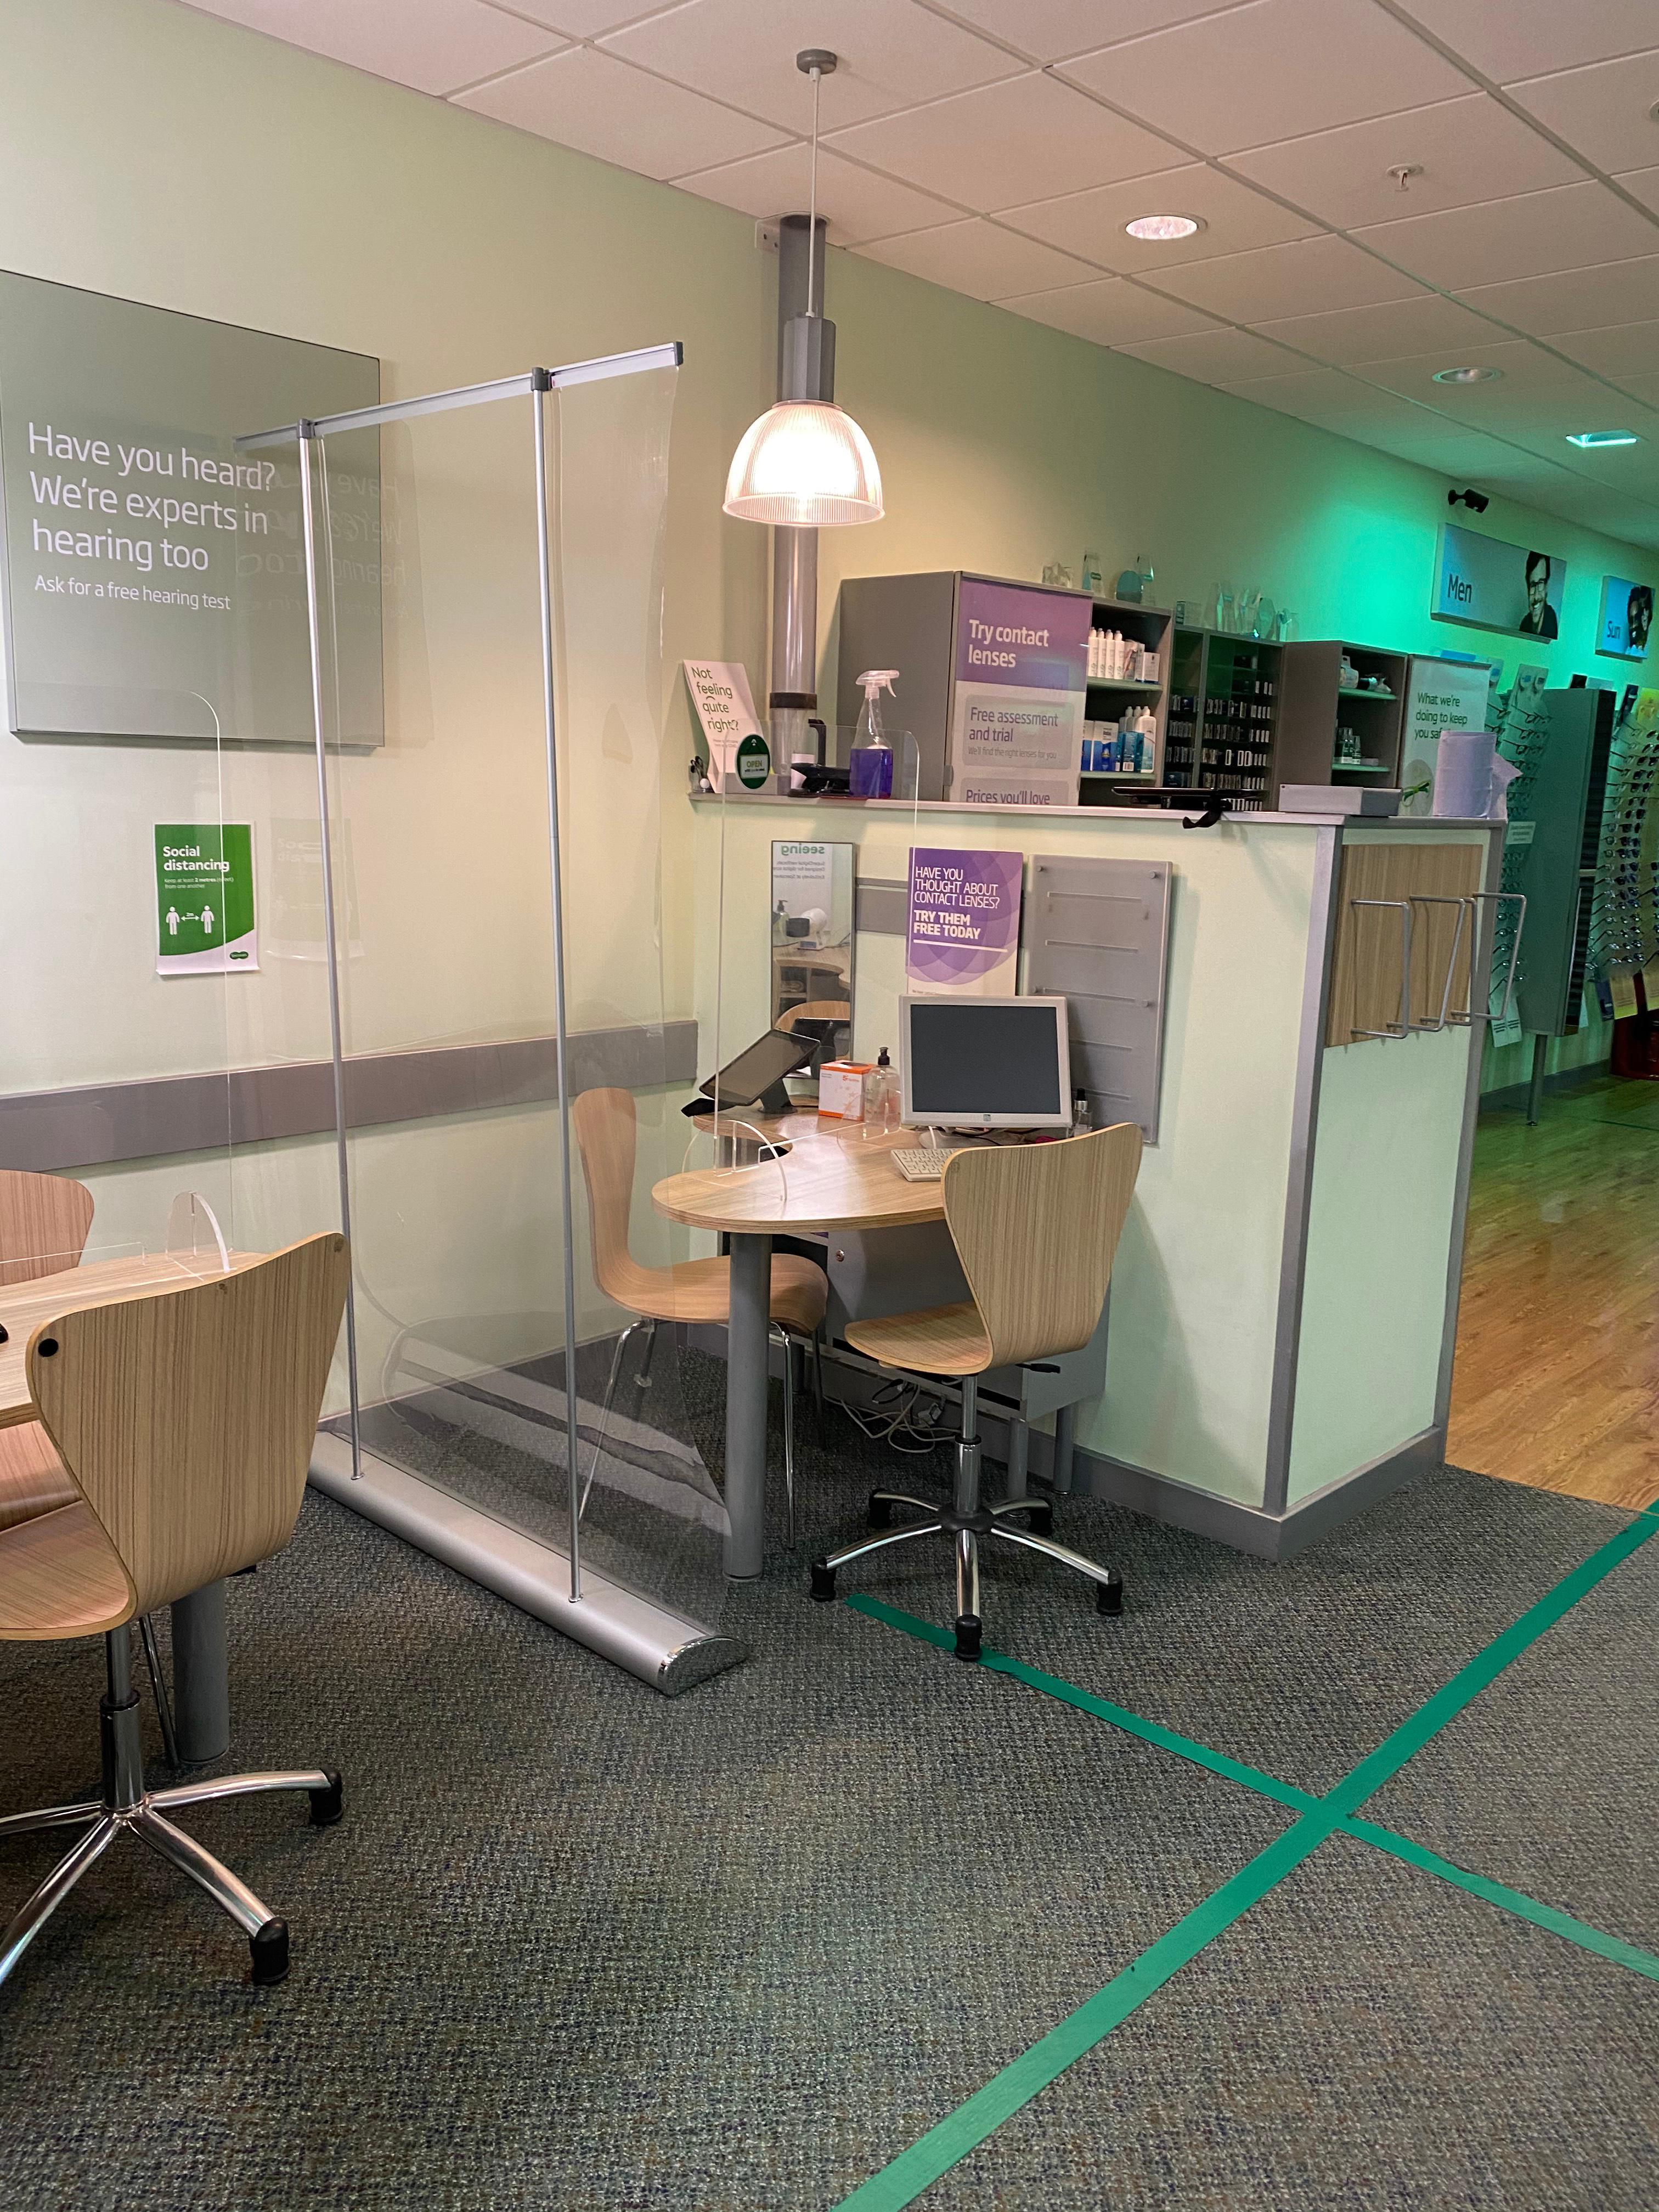 Images Specsavers Opticians and Audiologists - East Kilbride